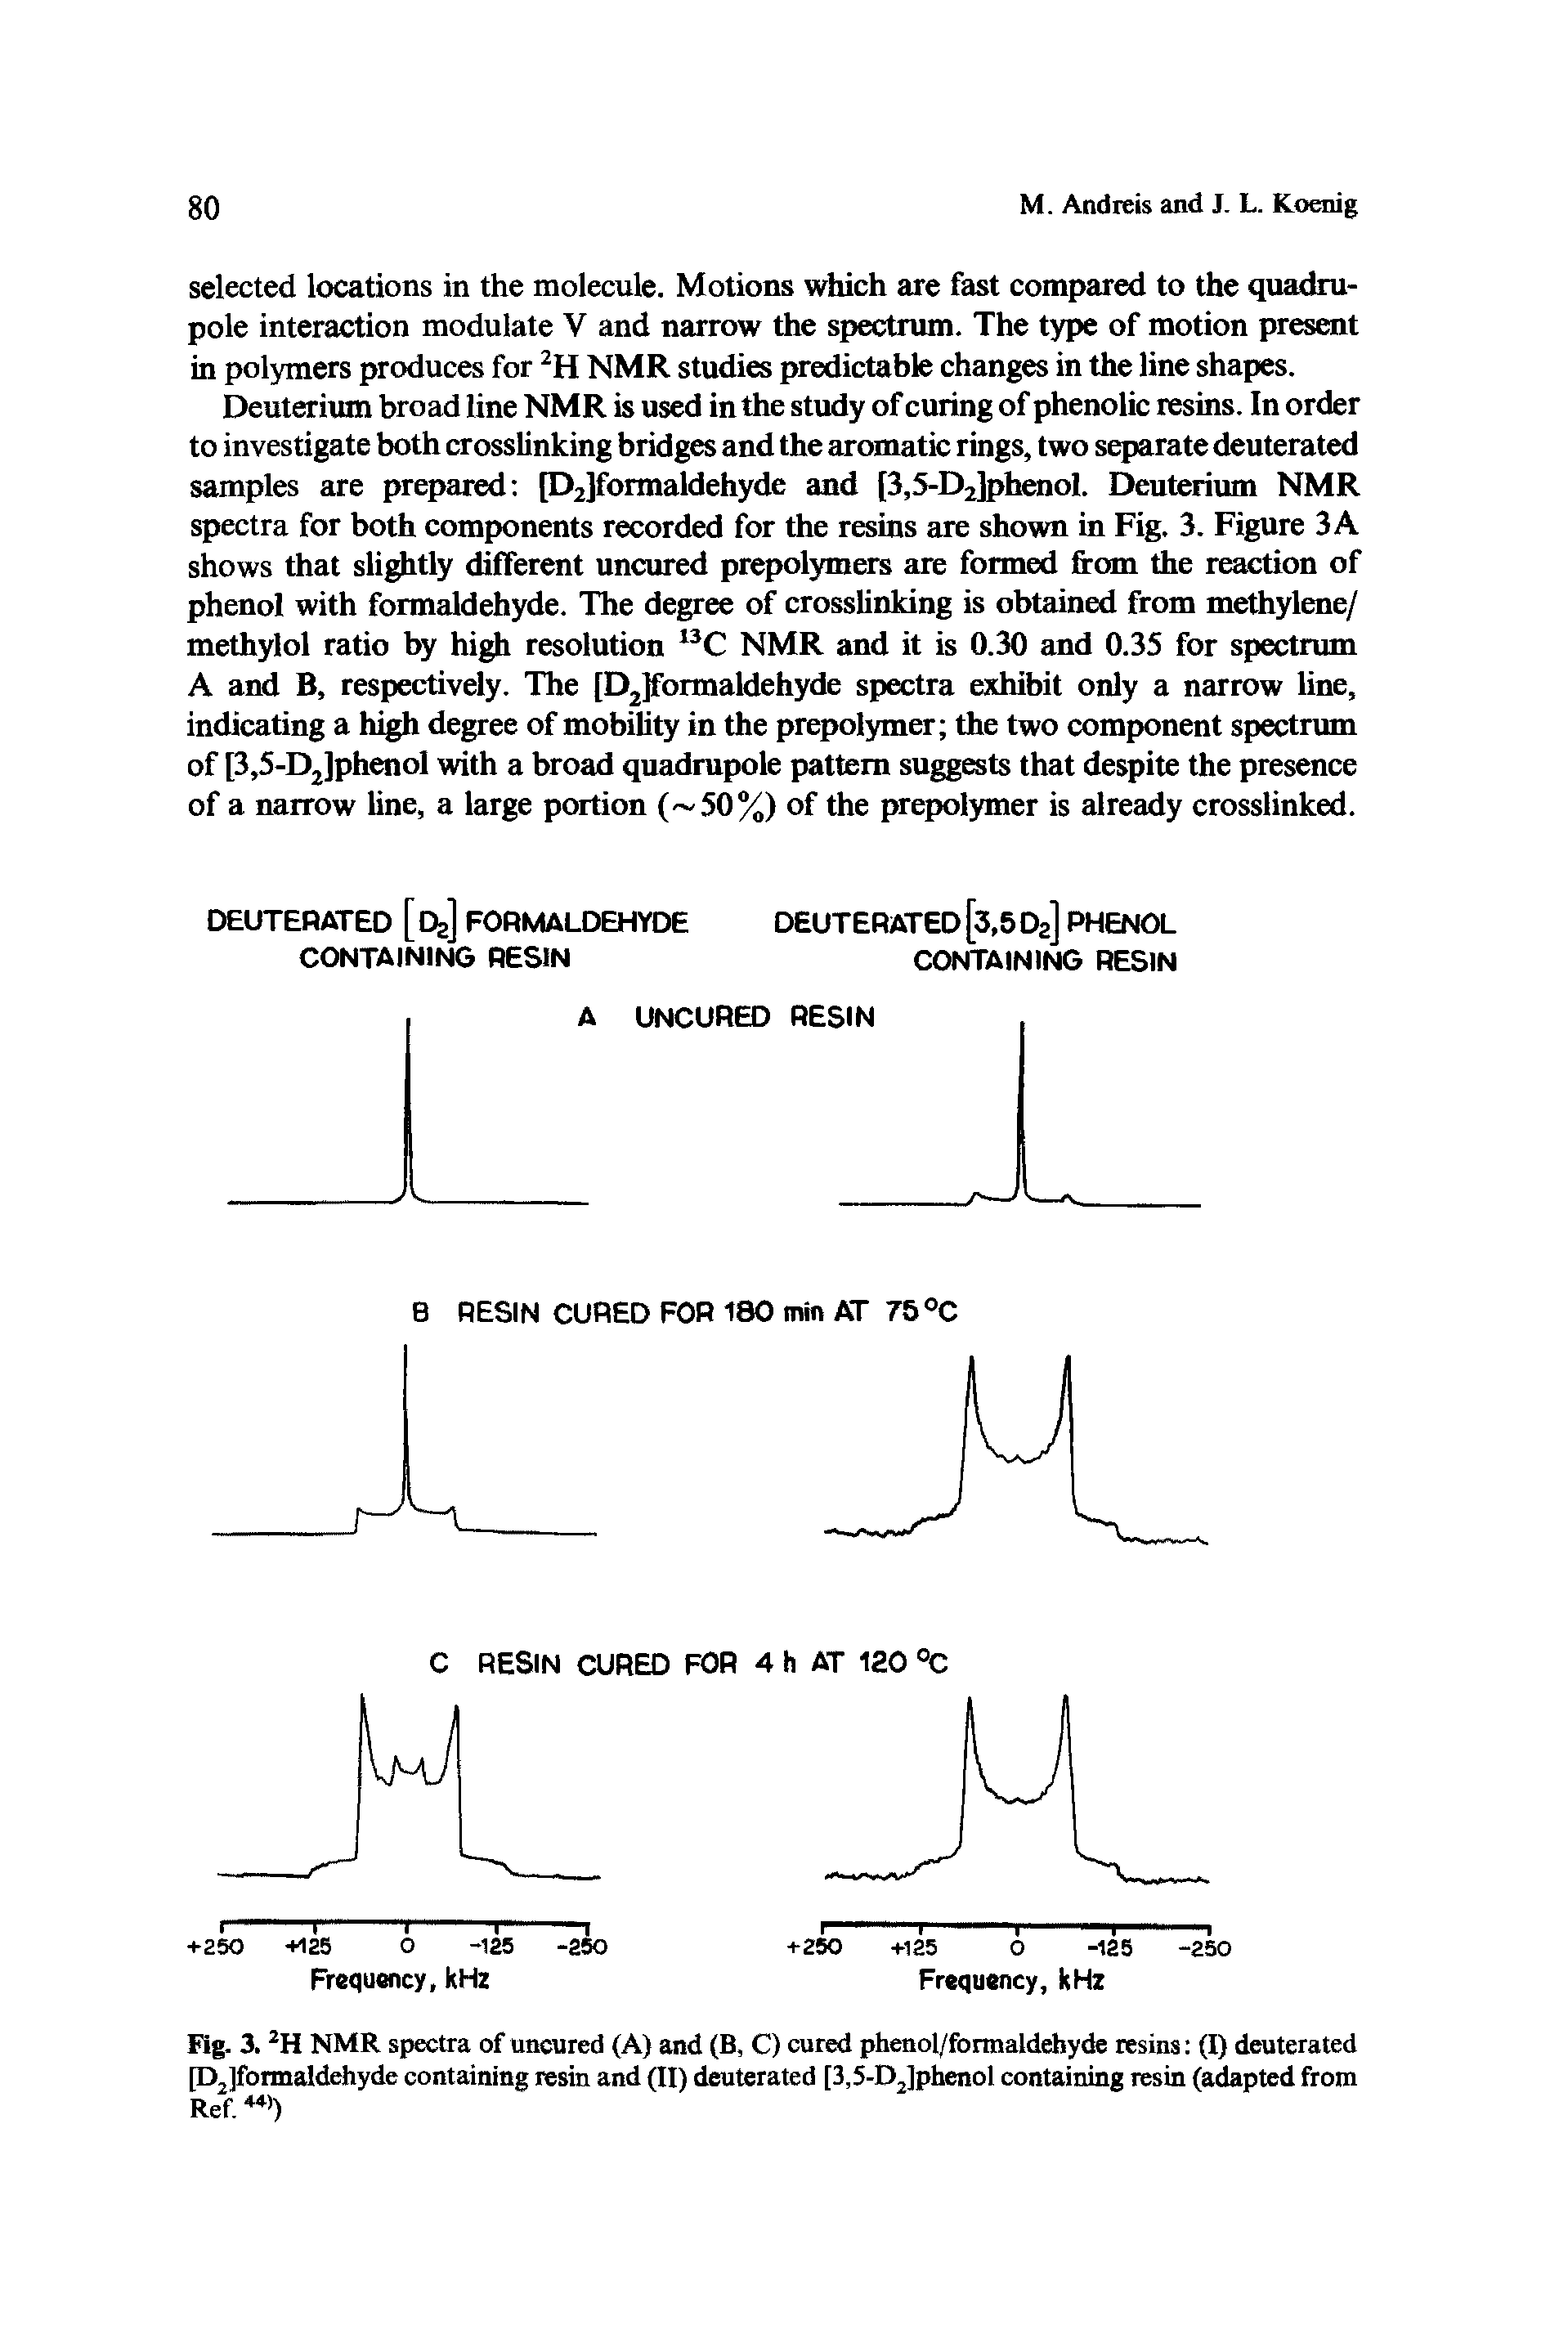 Fig. 3. 2H NMR spectra of uncured (A) and (B, C) cured phenol/formaldehyde resins (I) deuterated [DJformaldehyde containing resin and (II) deuterated [3,5-DJphenol containing resin (adapted from Ref. )...